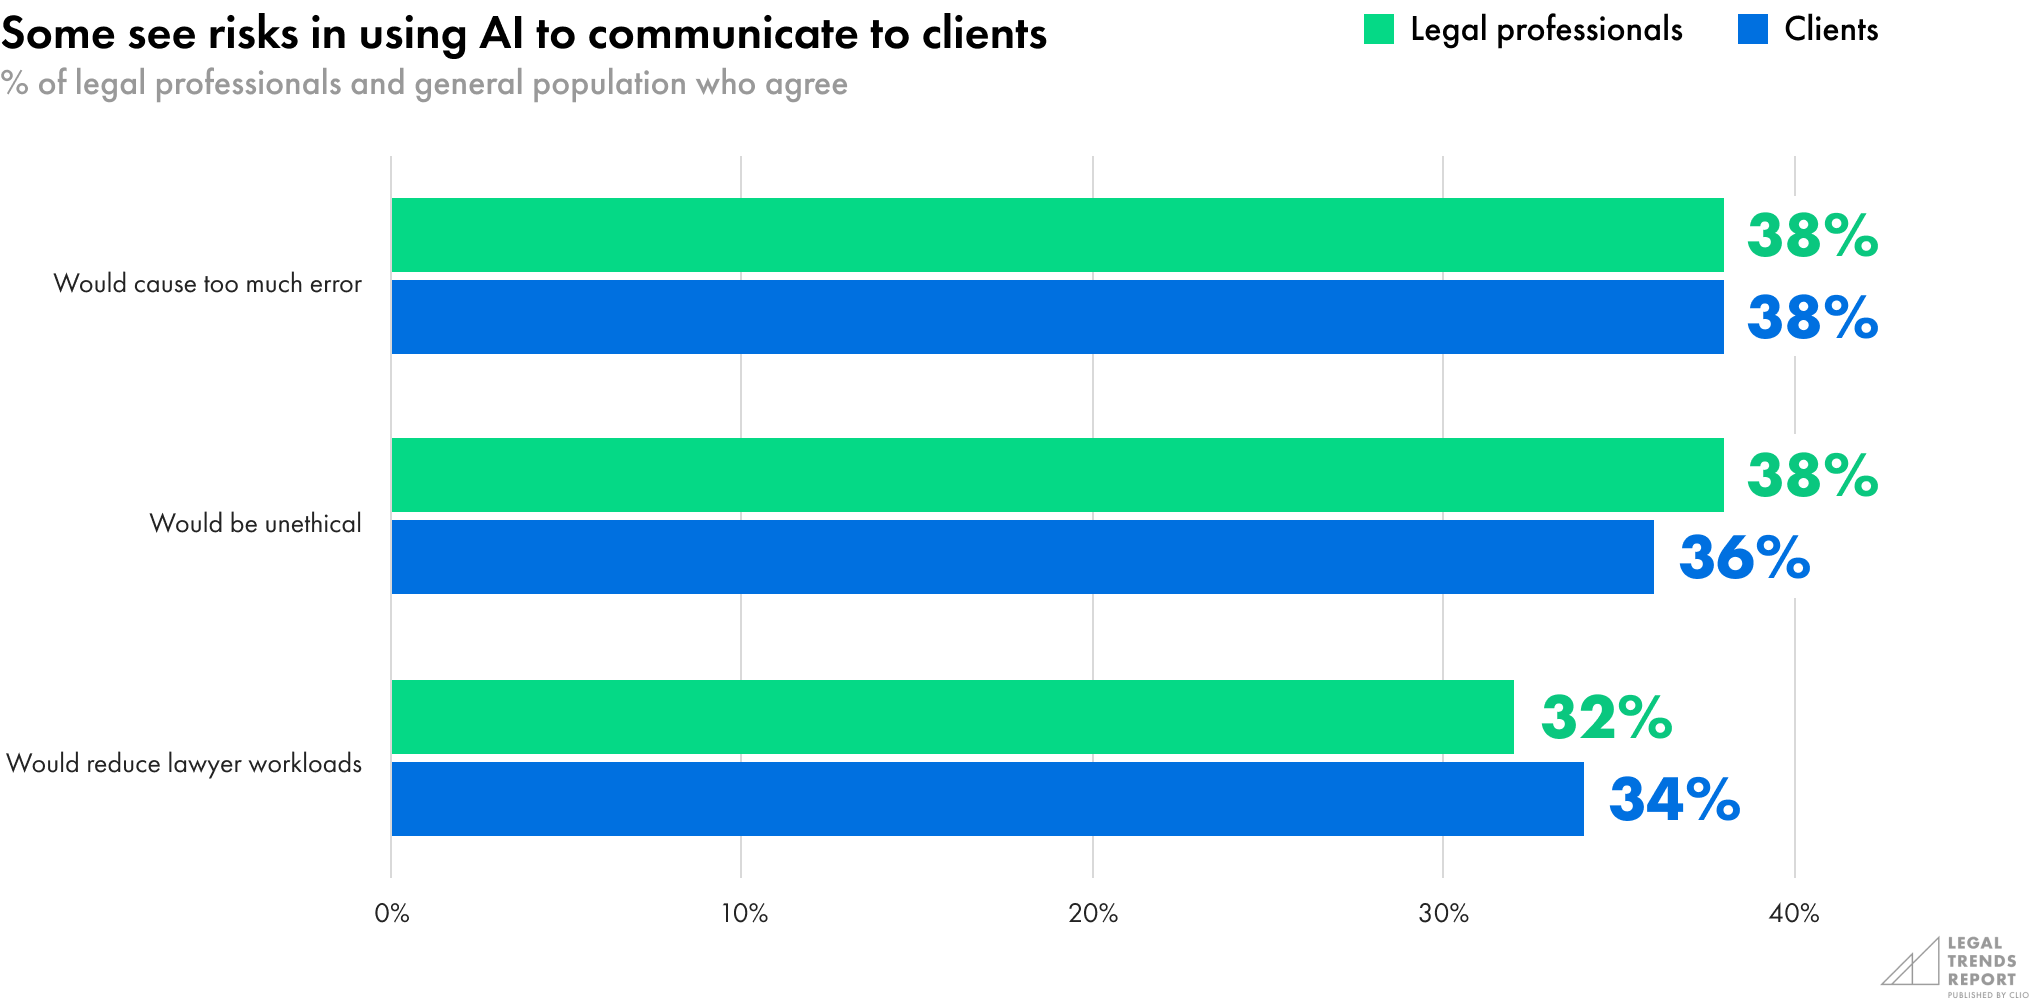 Some see risks in using AI to communicate to clients